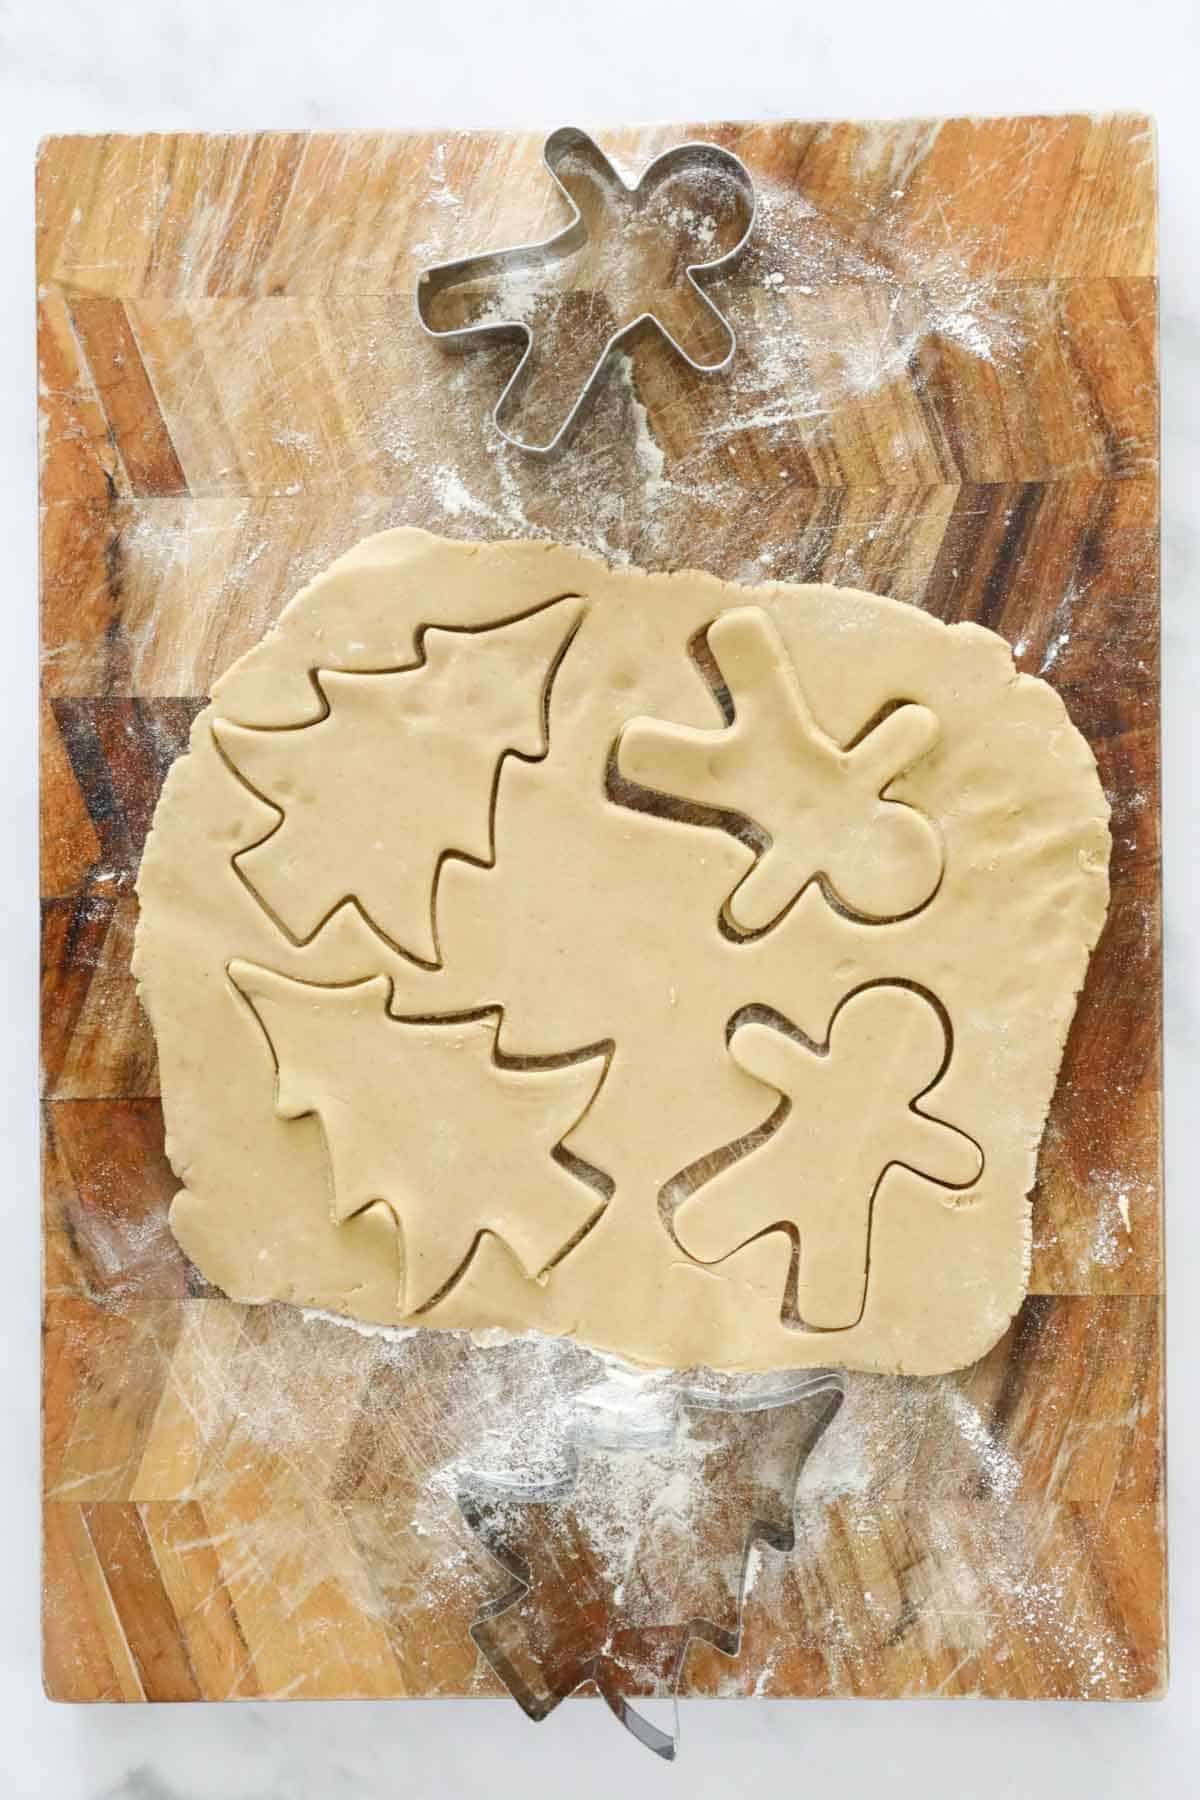 Christmas shapes being cut out of gingerbread dough.